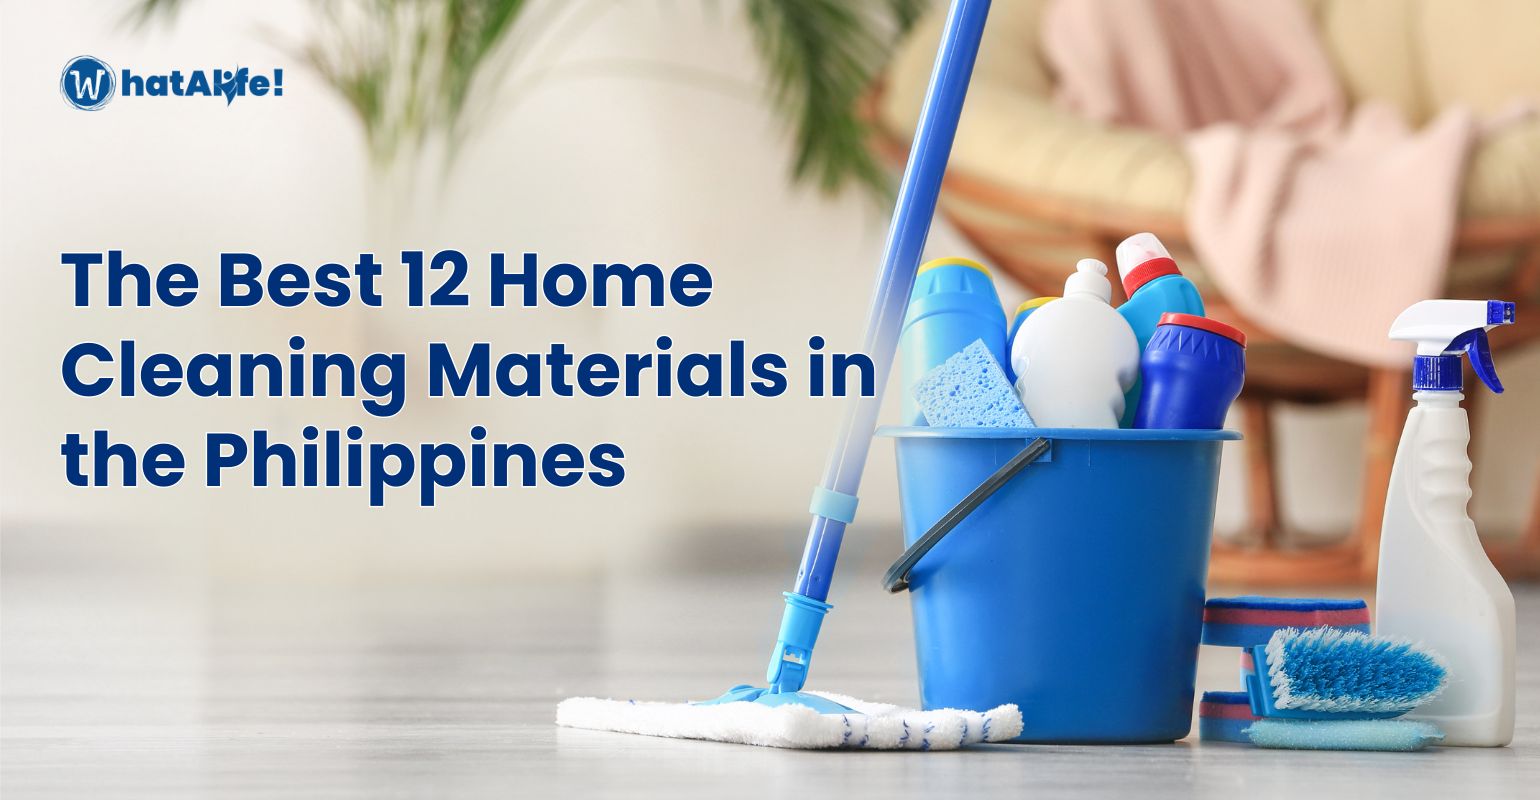 The Best 12 Home Cleaning Materials in the Philippines